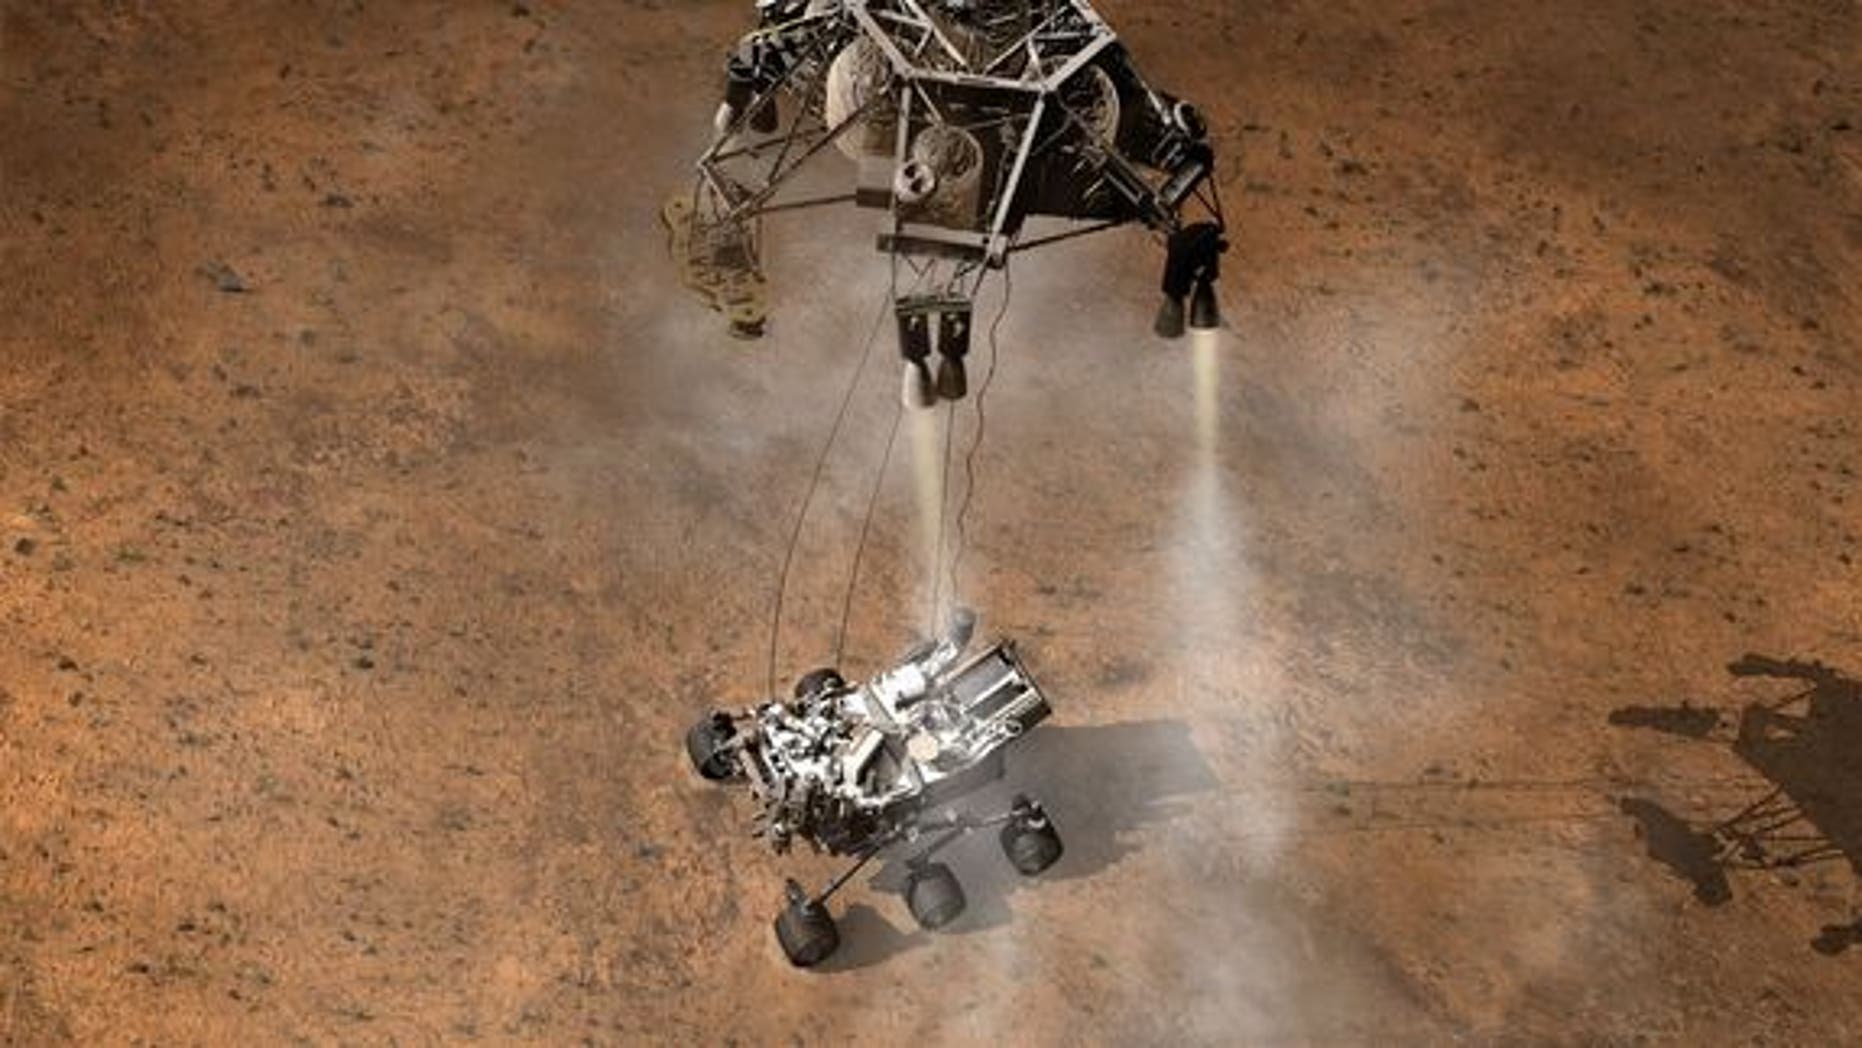 News of Huge Mars Rover's Landing Could be Delayed by ...